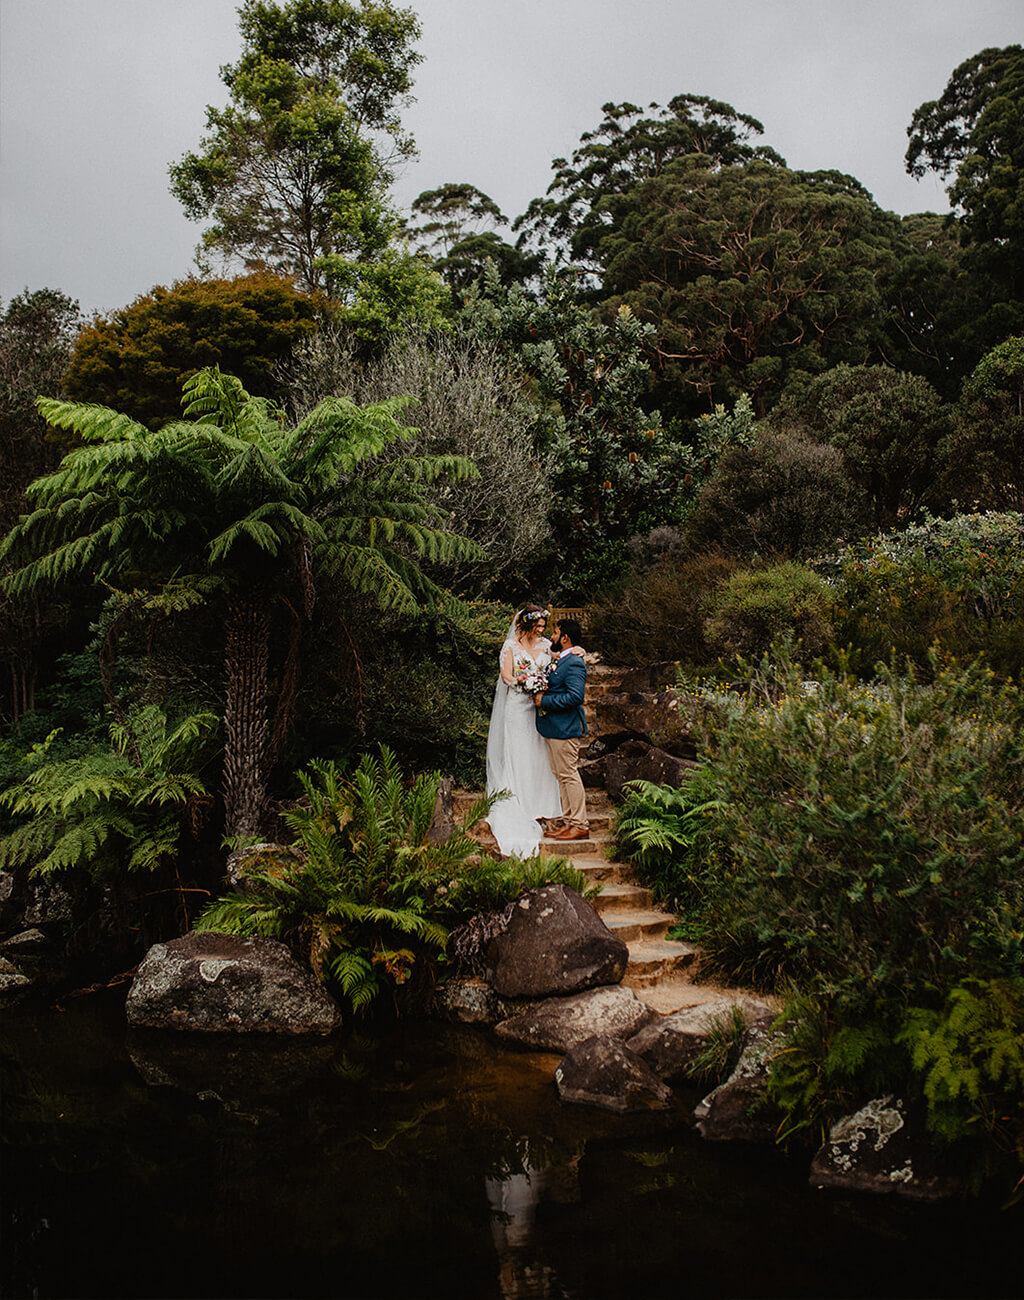 Bride and groom next to pond in lush garden with towering ferns and prehistoric-looking jungle